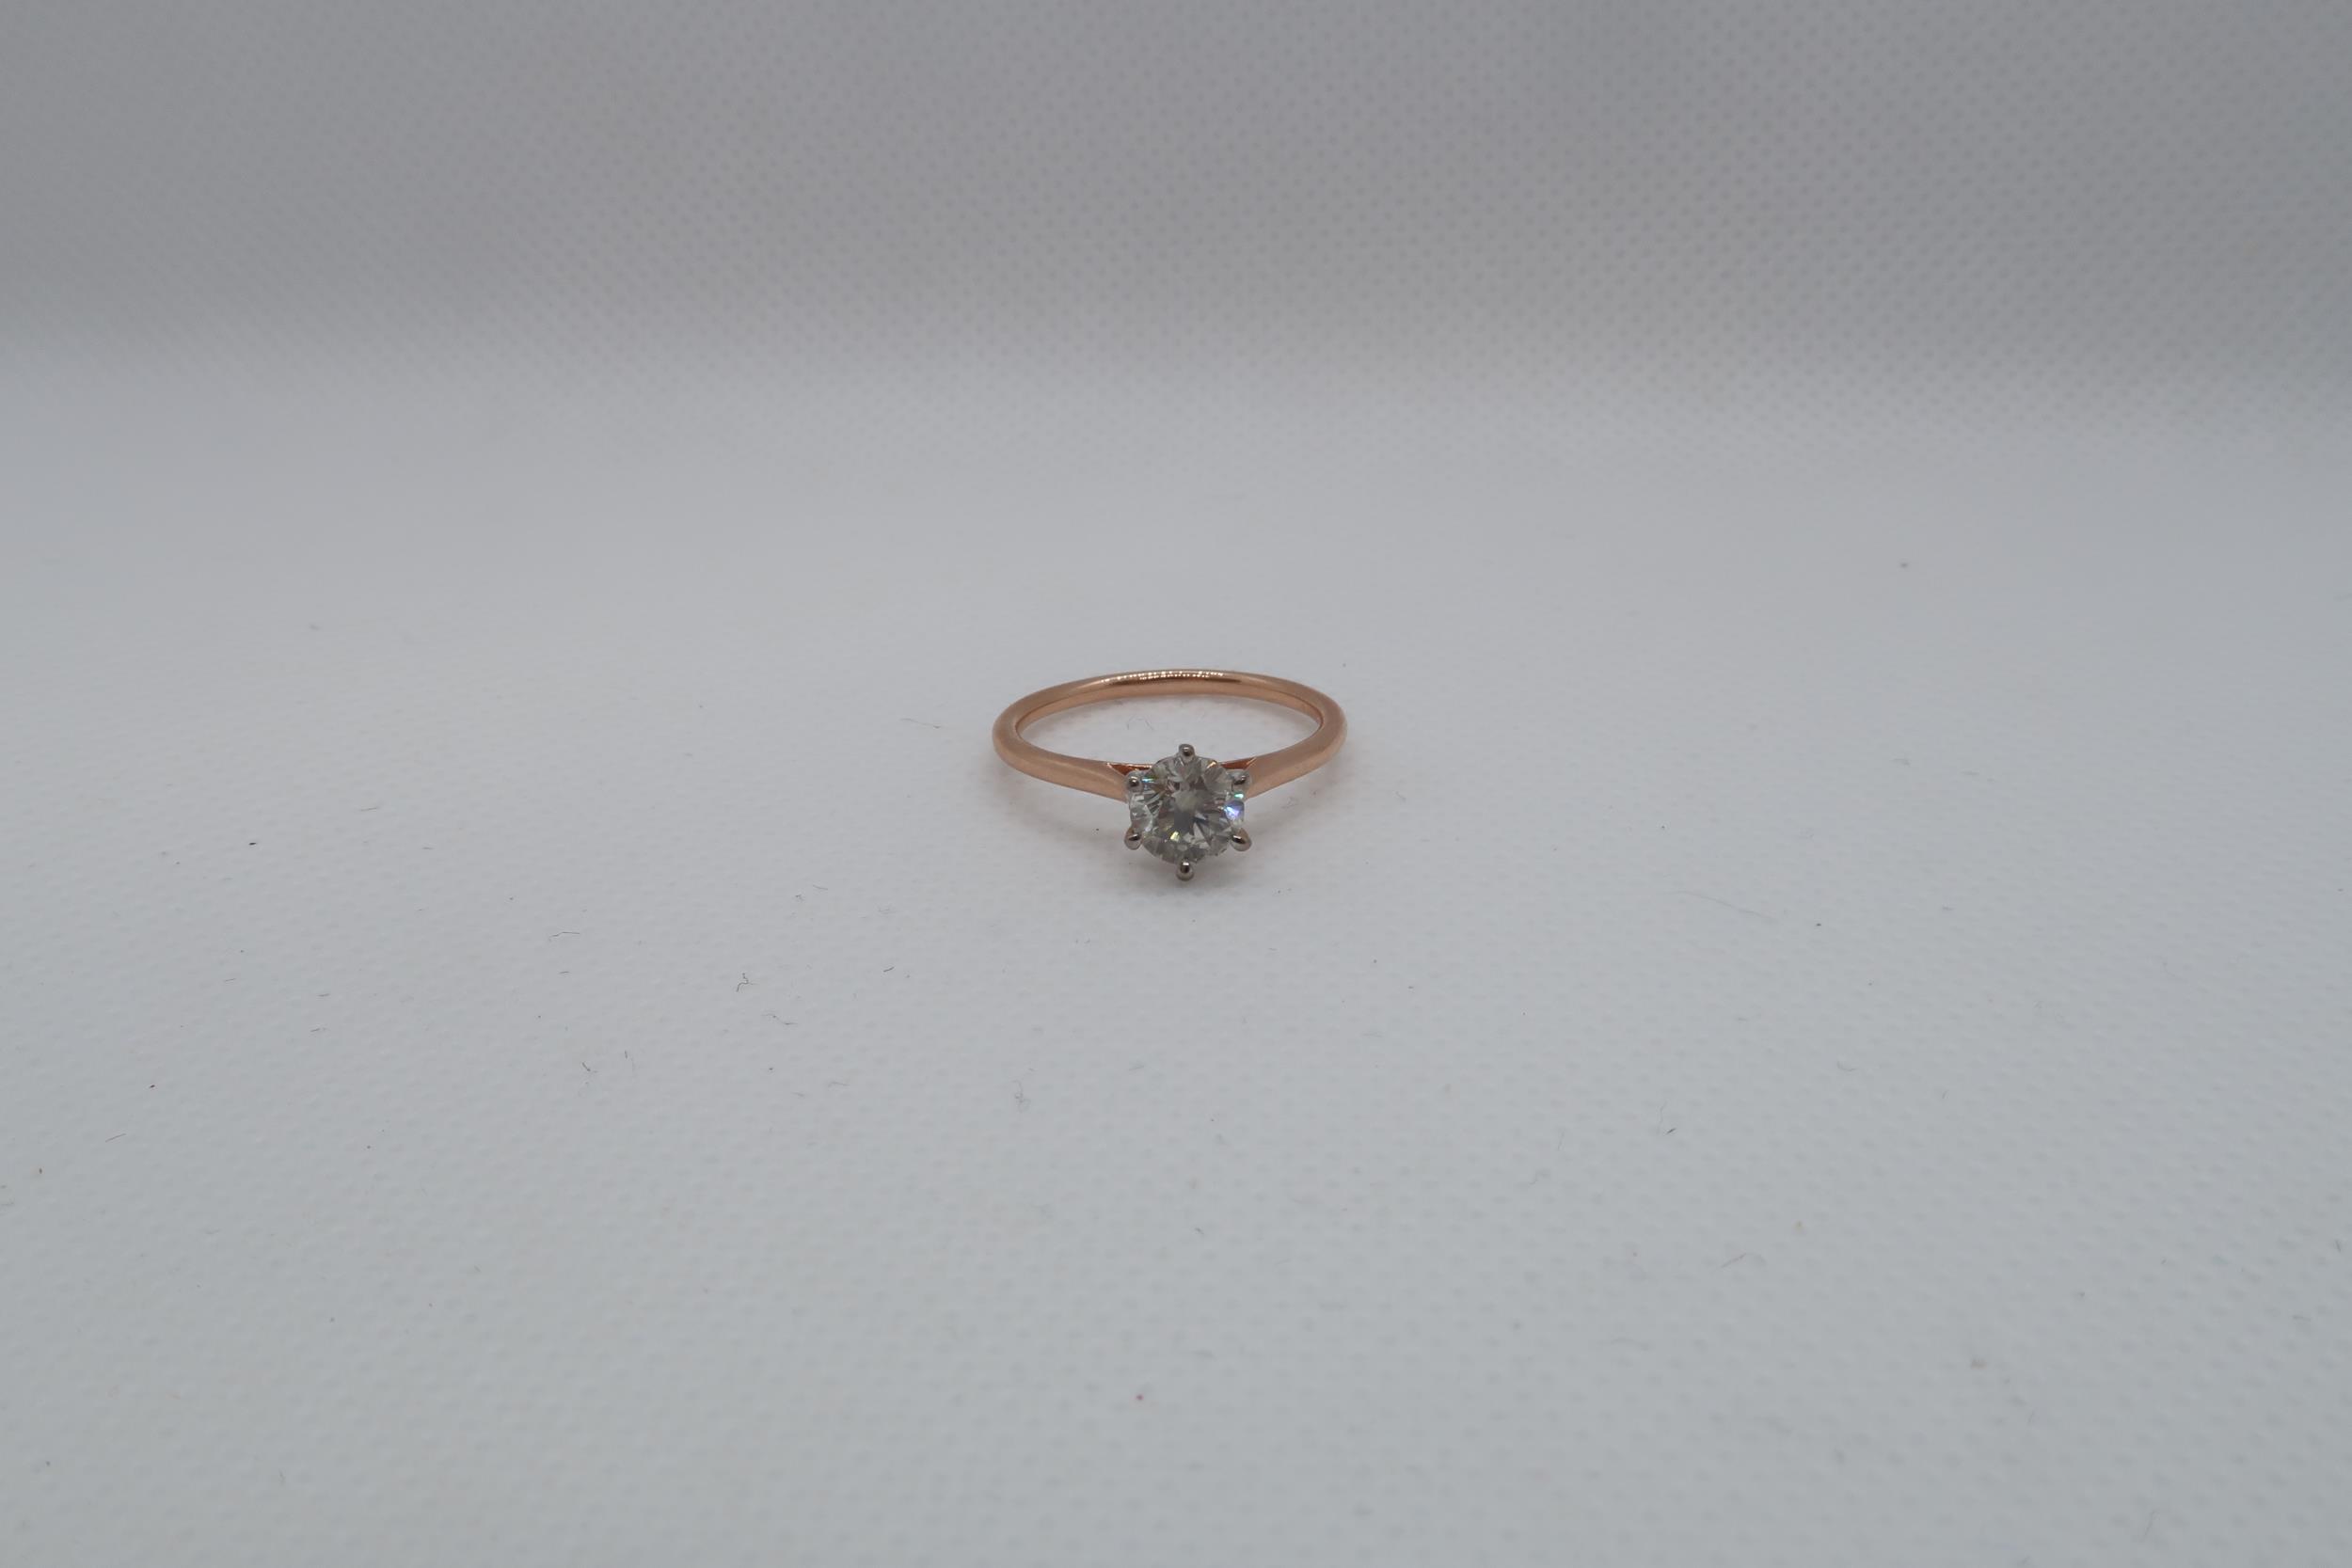 A certificated 18ct white and rose gold round brilliant cut diamond solitaire diamond ring - Diamond - Image 2 of 3